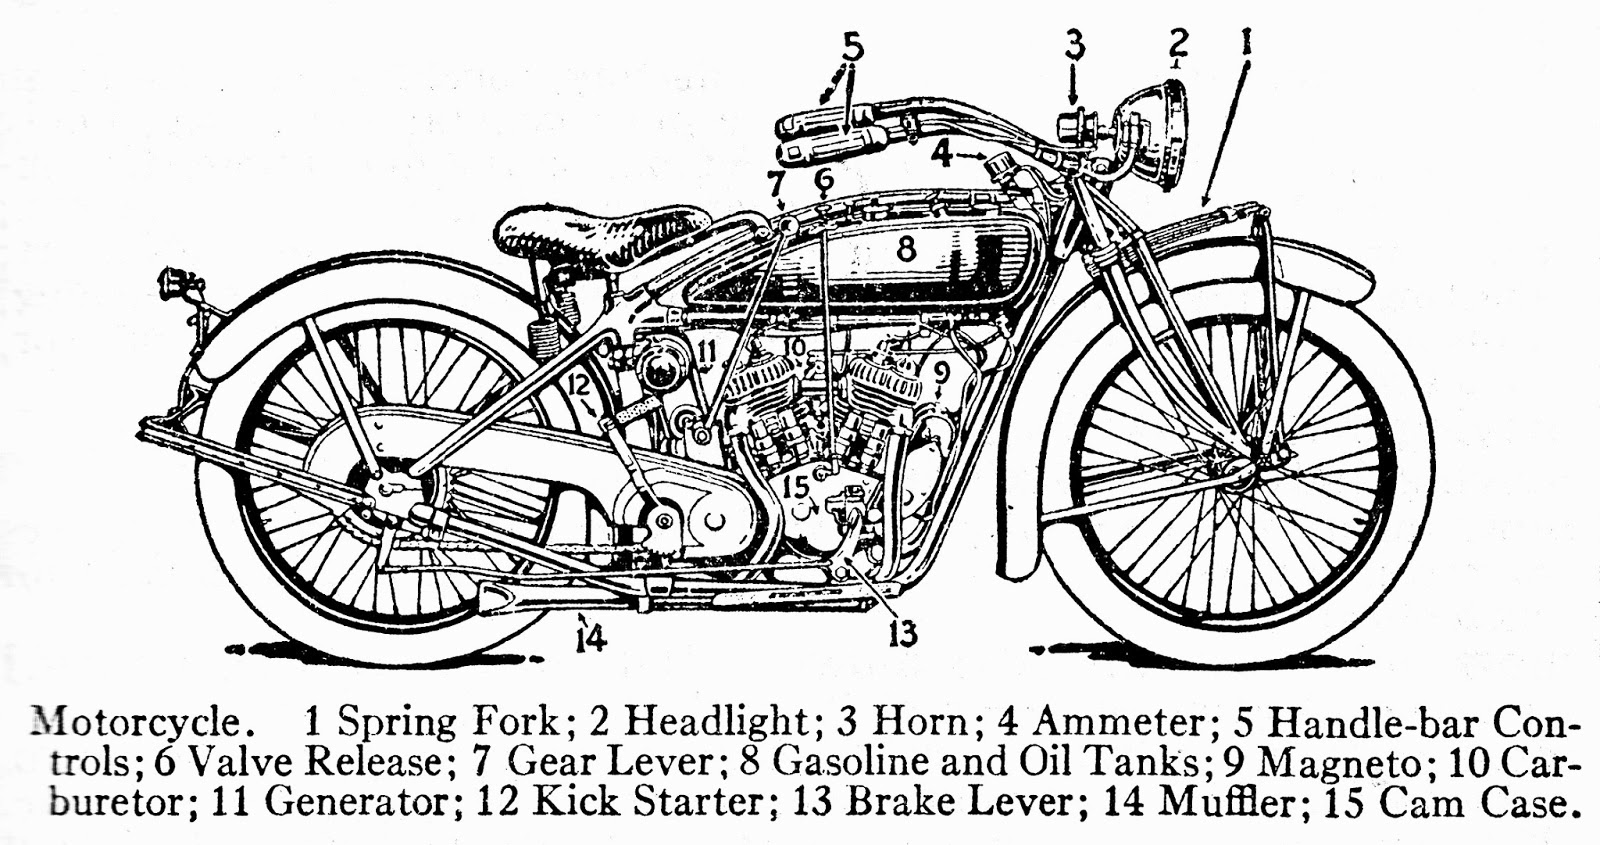 Just A Car Guy: a 1934 Motorcycle stayed in the dictionary as an